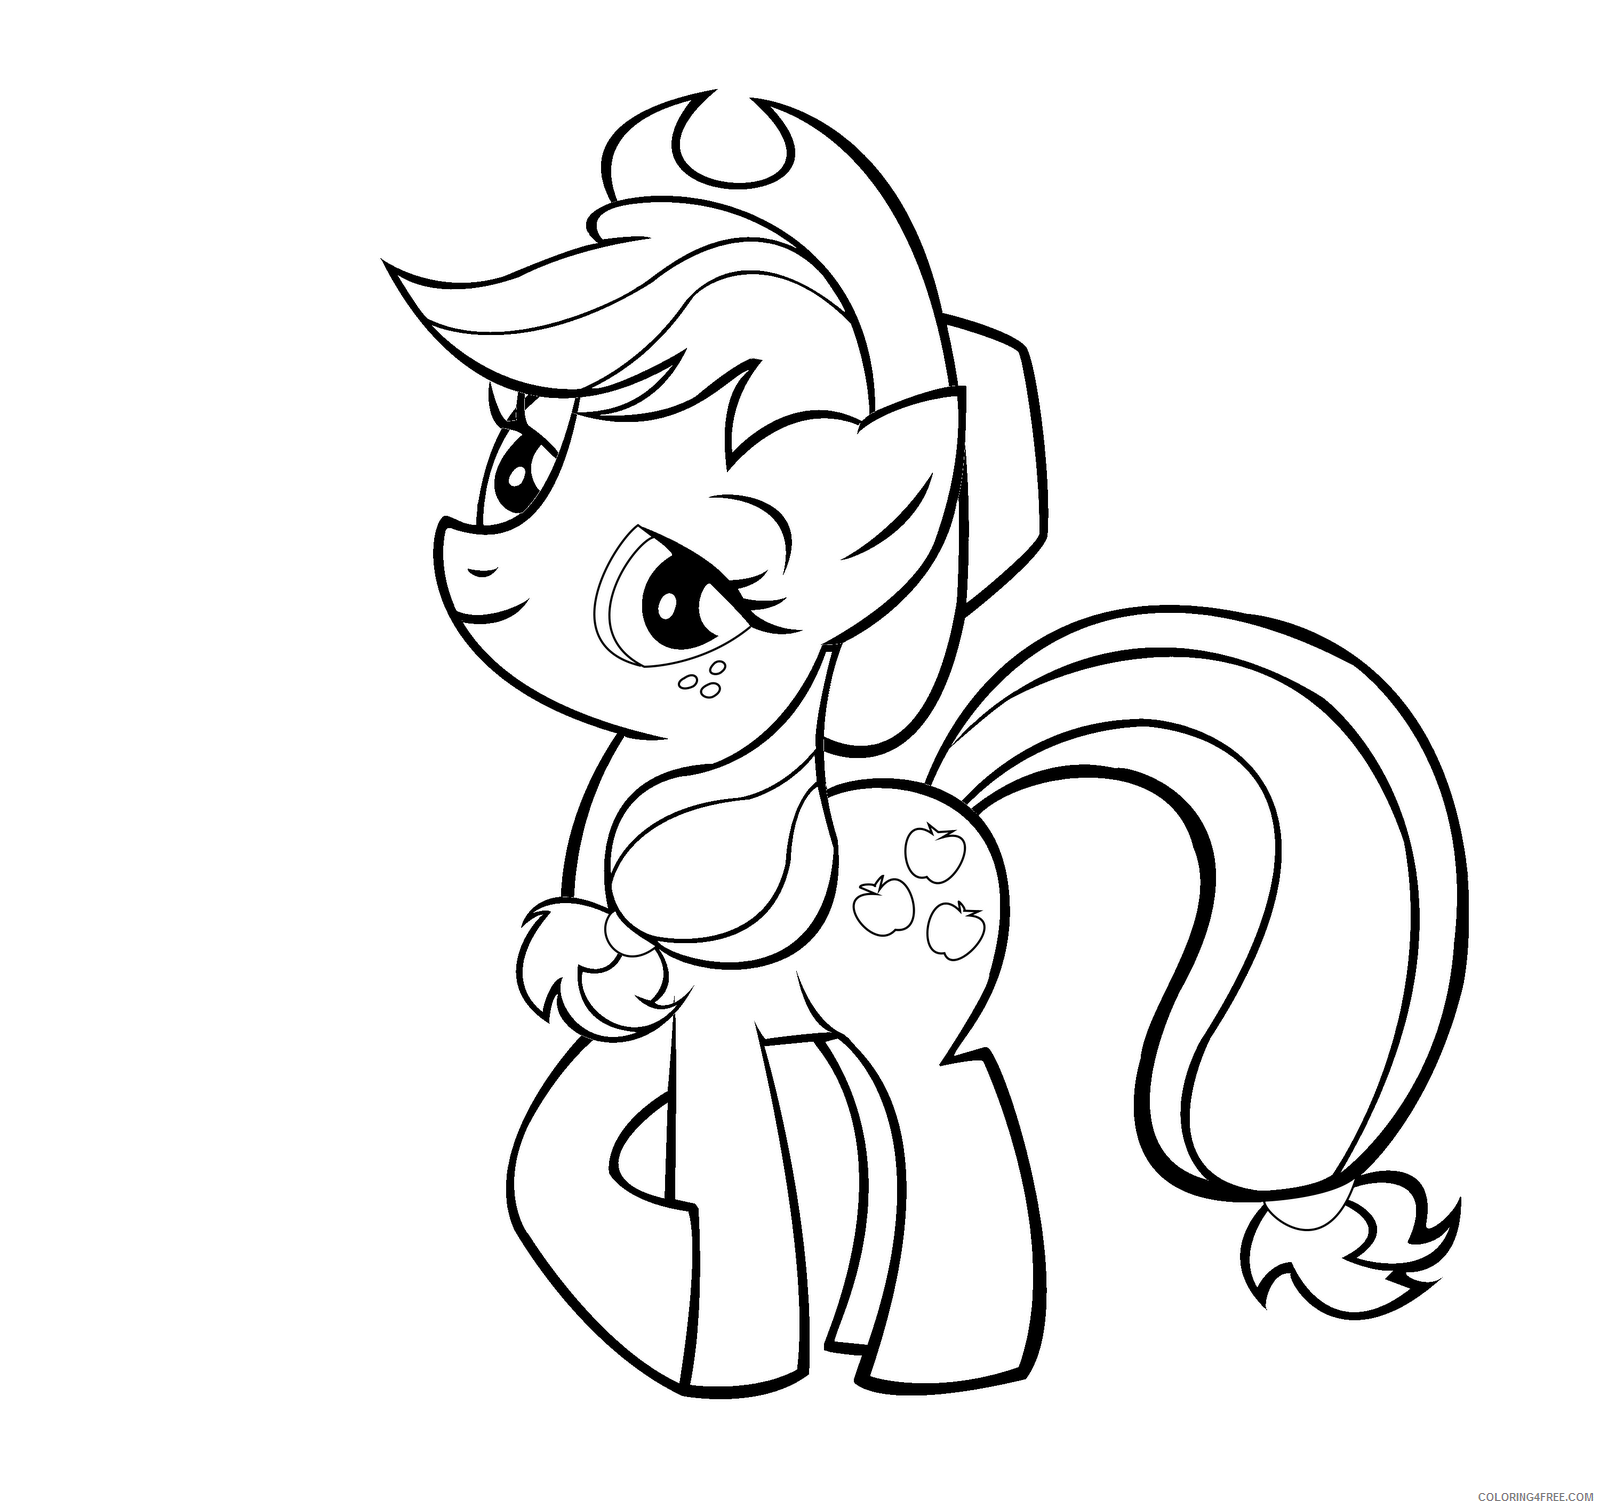 Applejack My Little Pony Coloring Pages Printable Sheets Applejack for Kids 2021 a 2120 Coloring4free